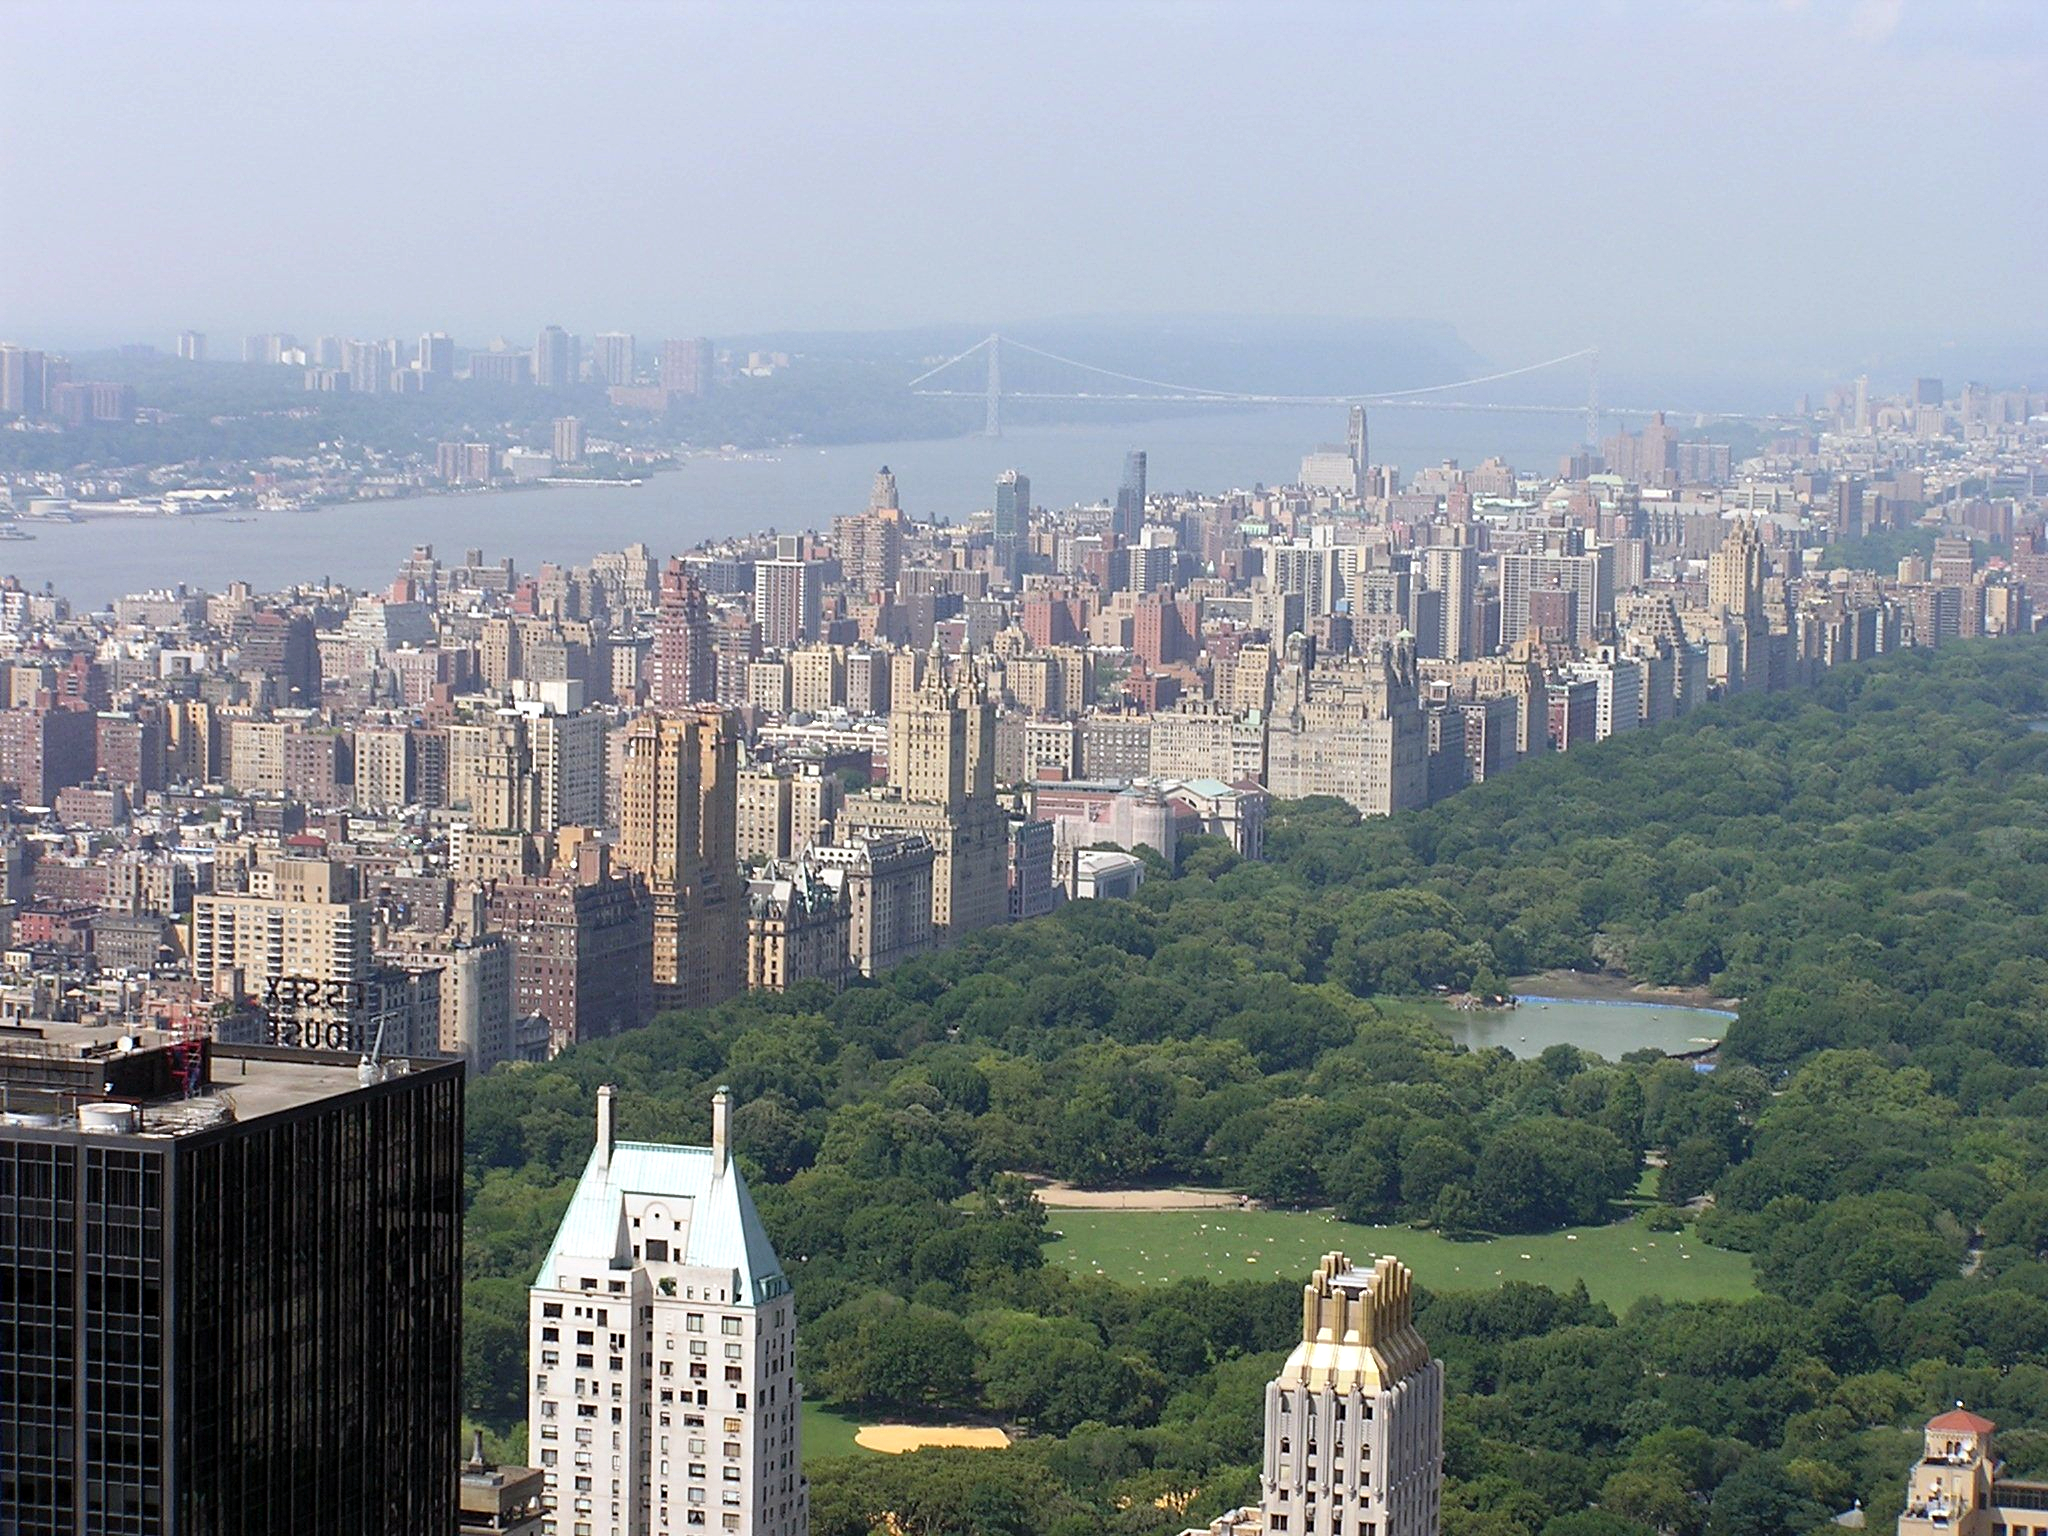 color aerial photograph of central park and surrounding skyscrapers on a foggy day